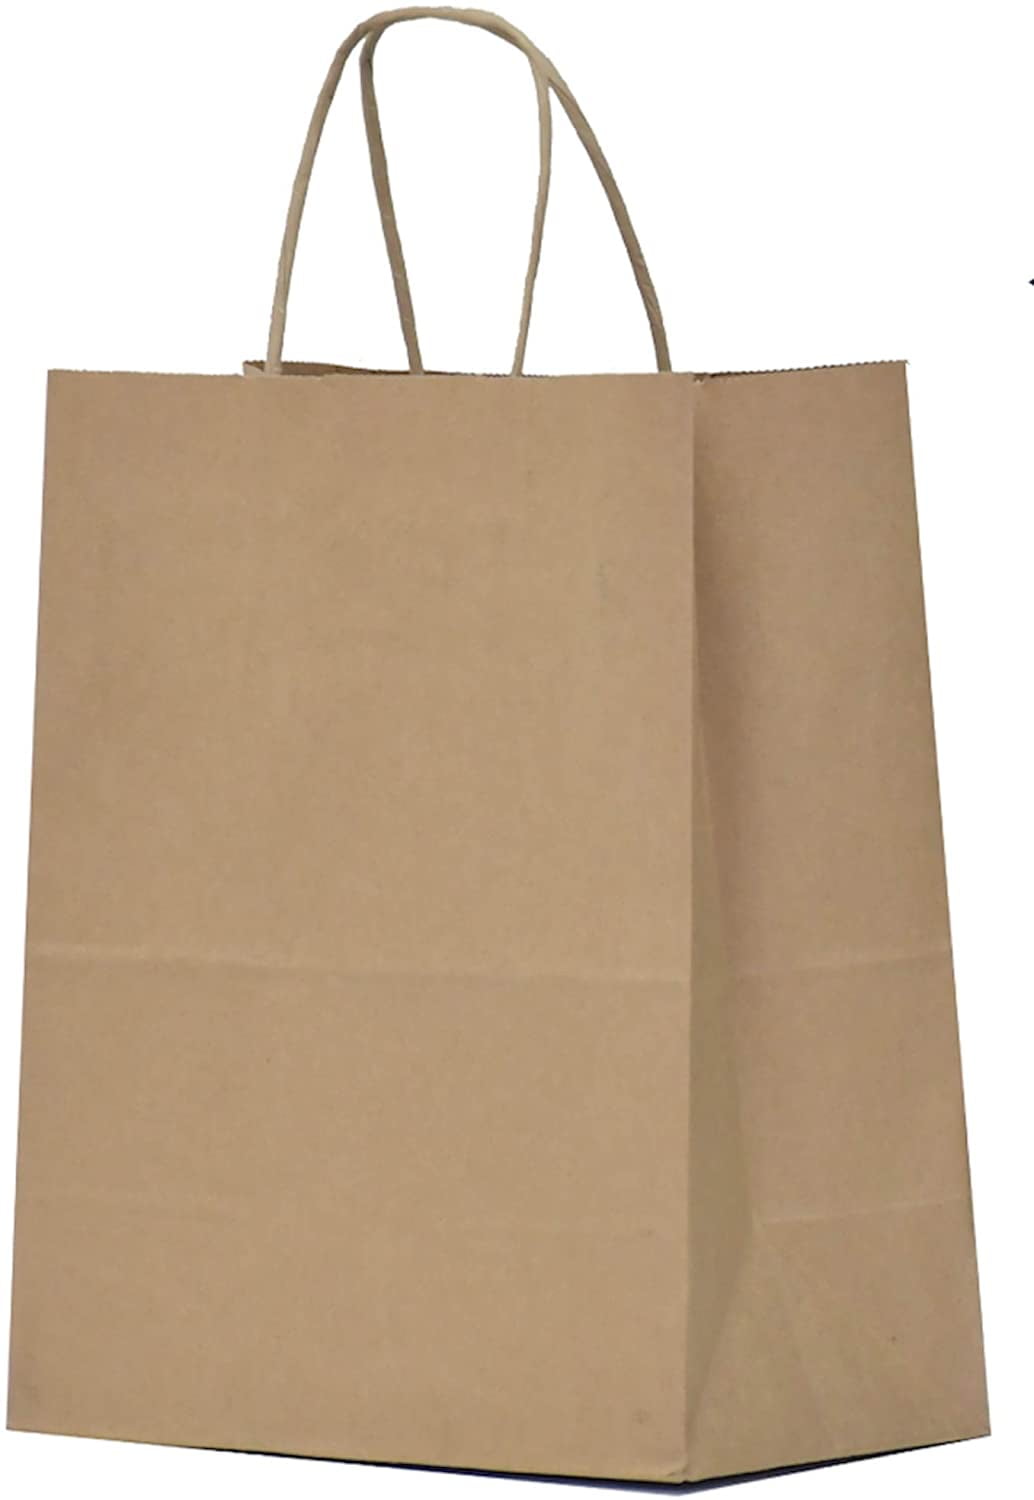 Medium BROWN PAPER CARRIER BAGS with HANDLES Sandwich/Lunch/Food/Fruit 8x4x10" 